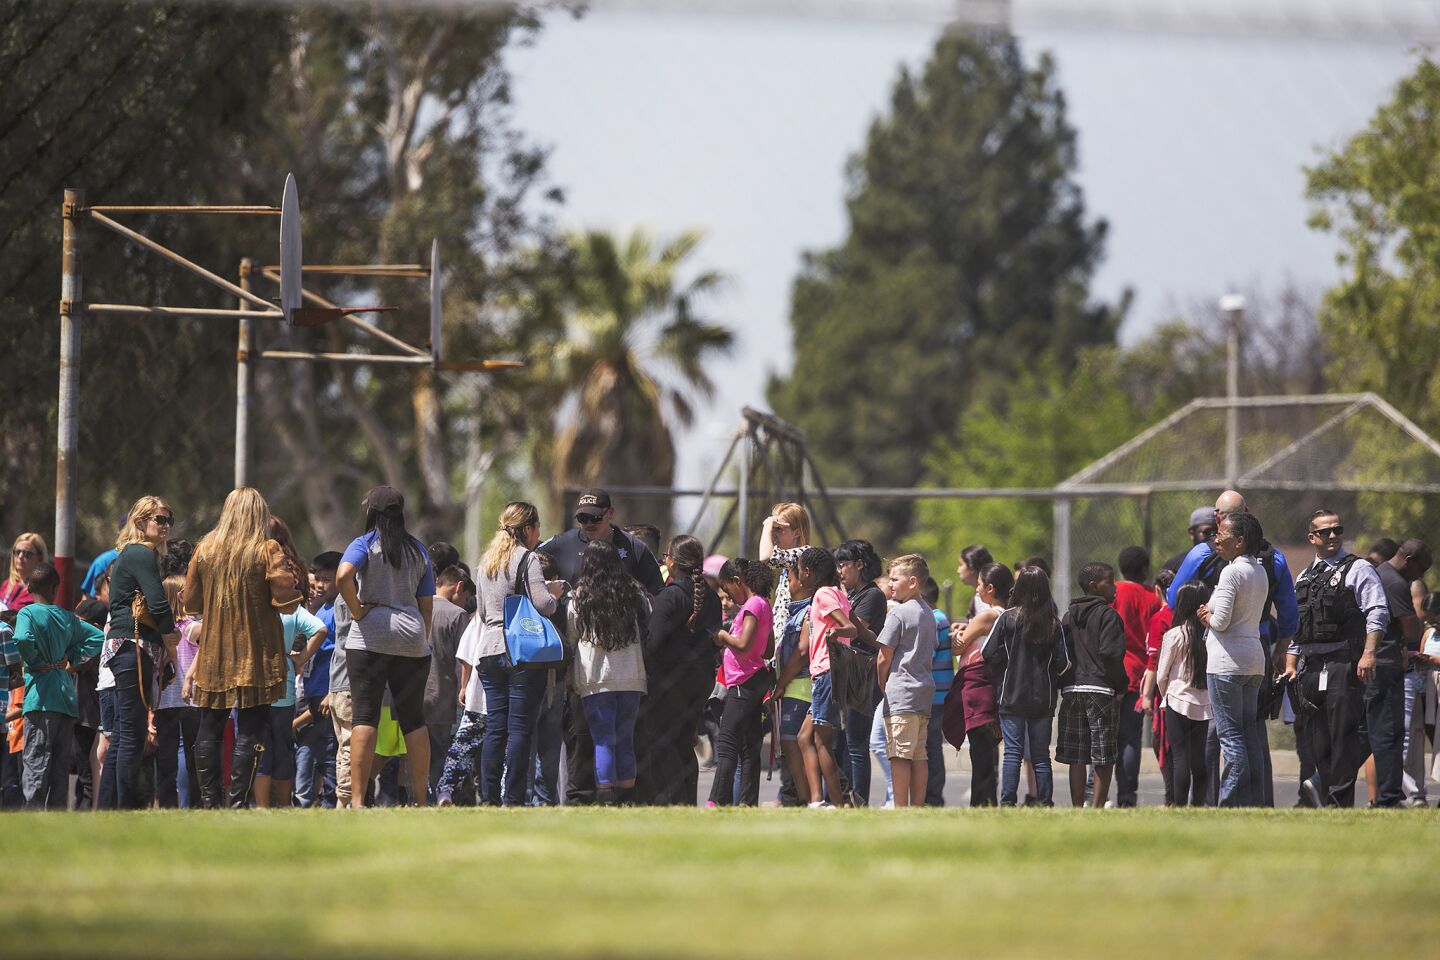 Evacuated students and teachers gather on the playground after a shooting inside North Park Elementary School in San Bernardino.